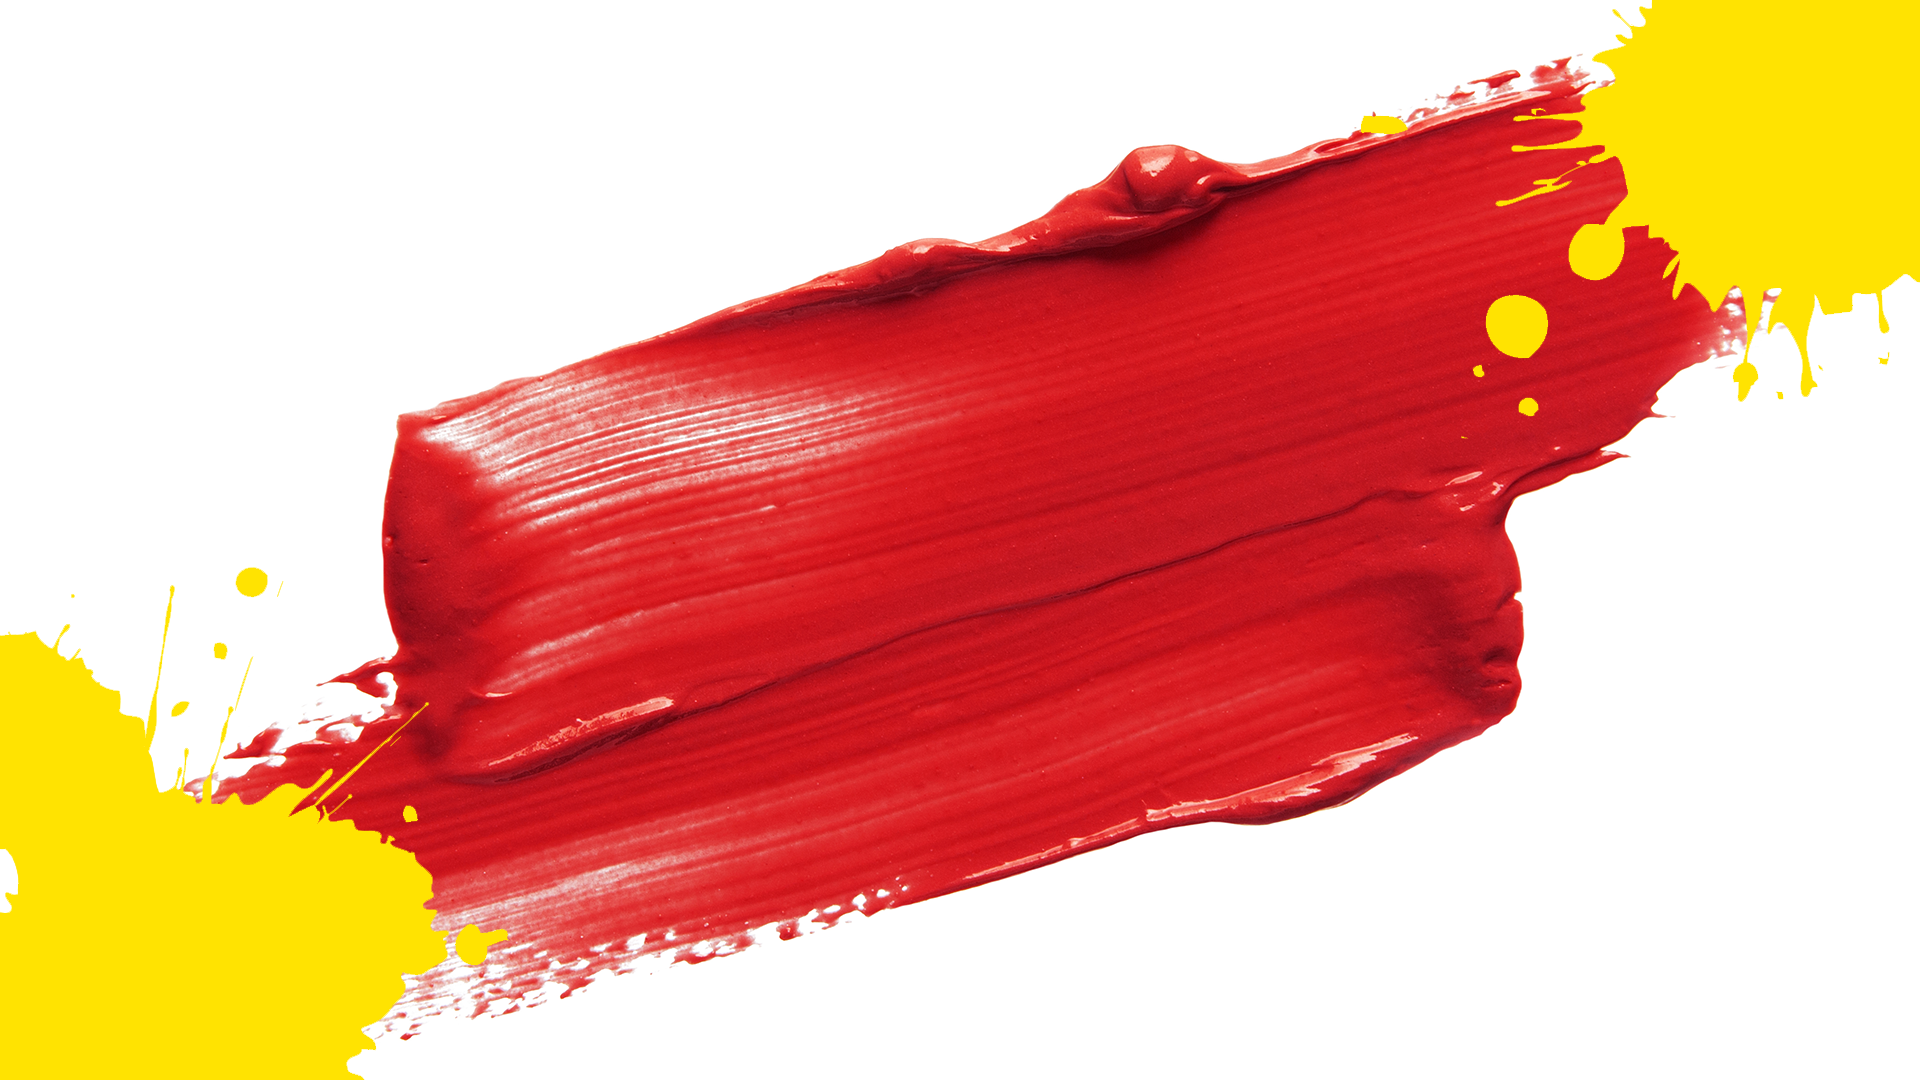 A smear of something red and some splats